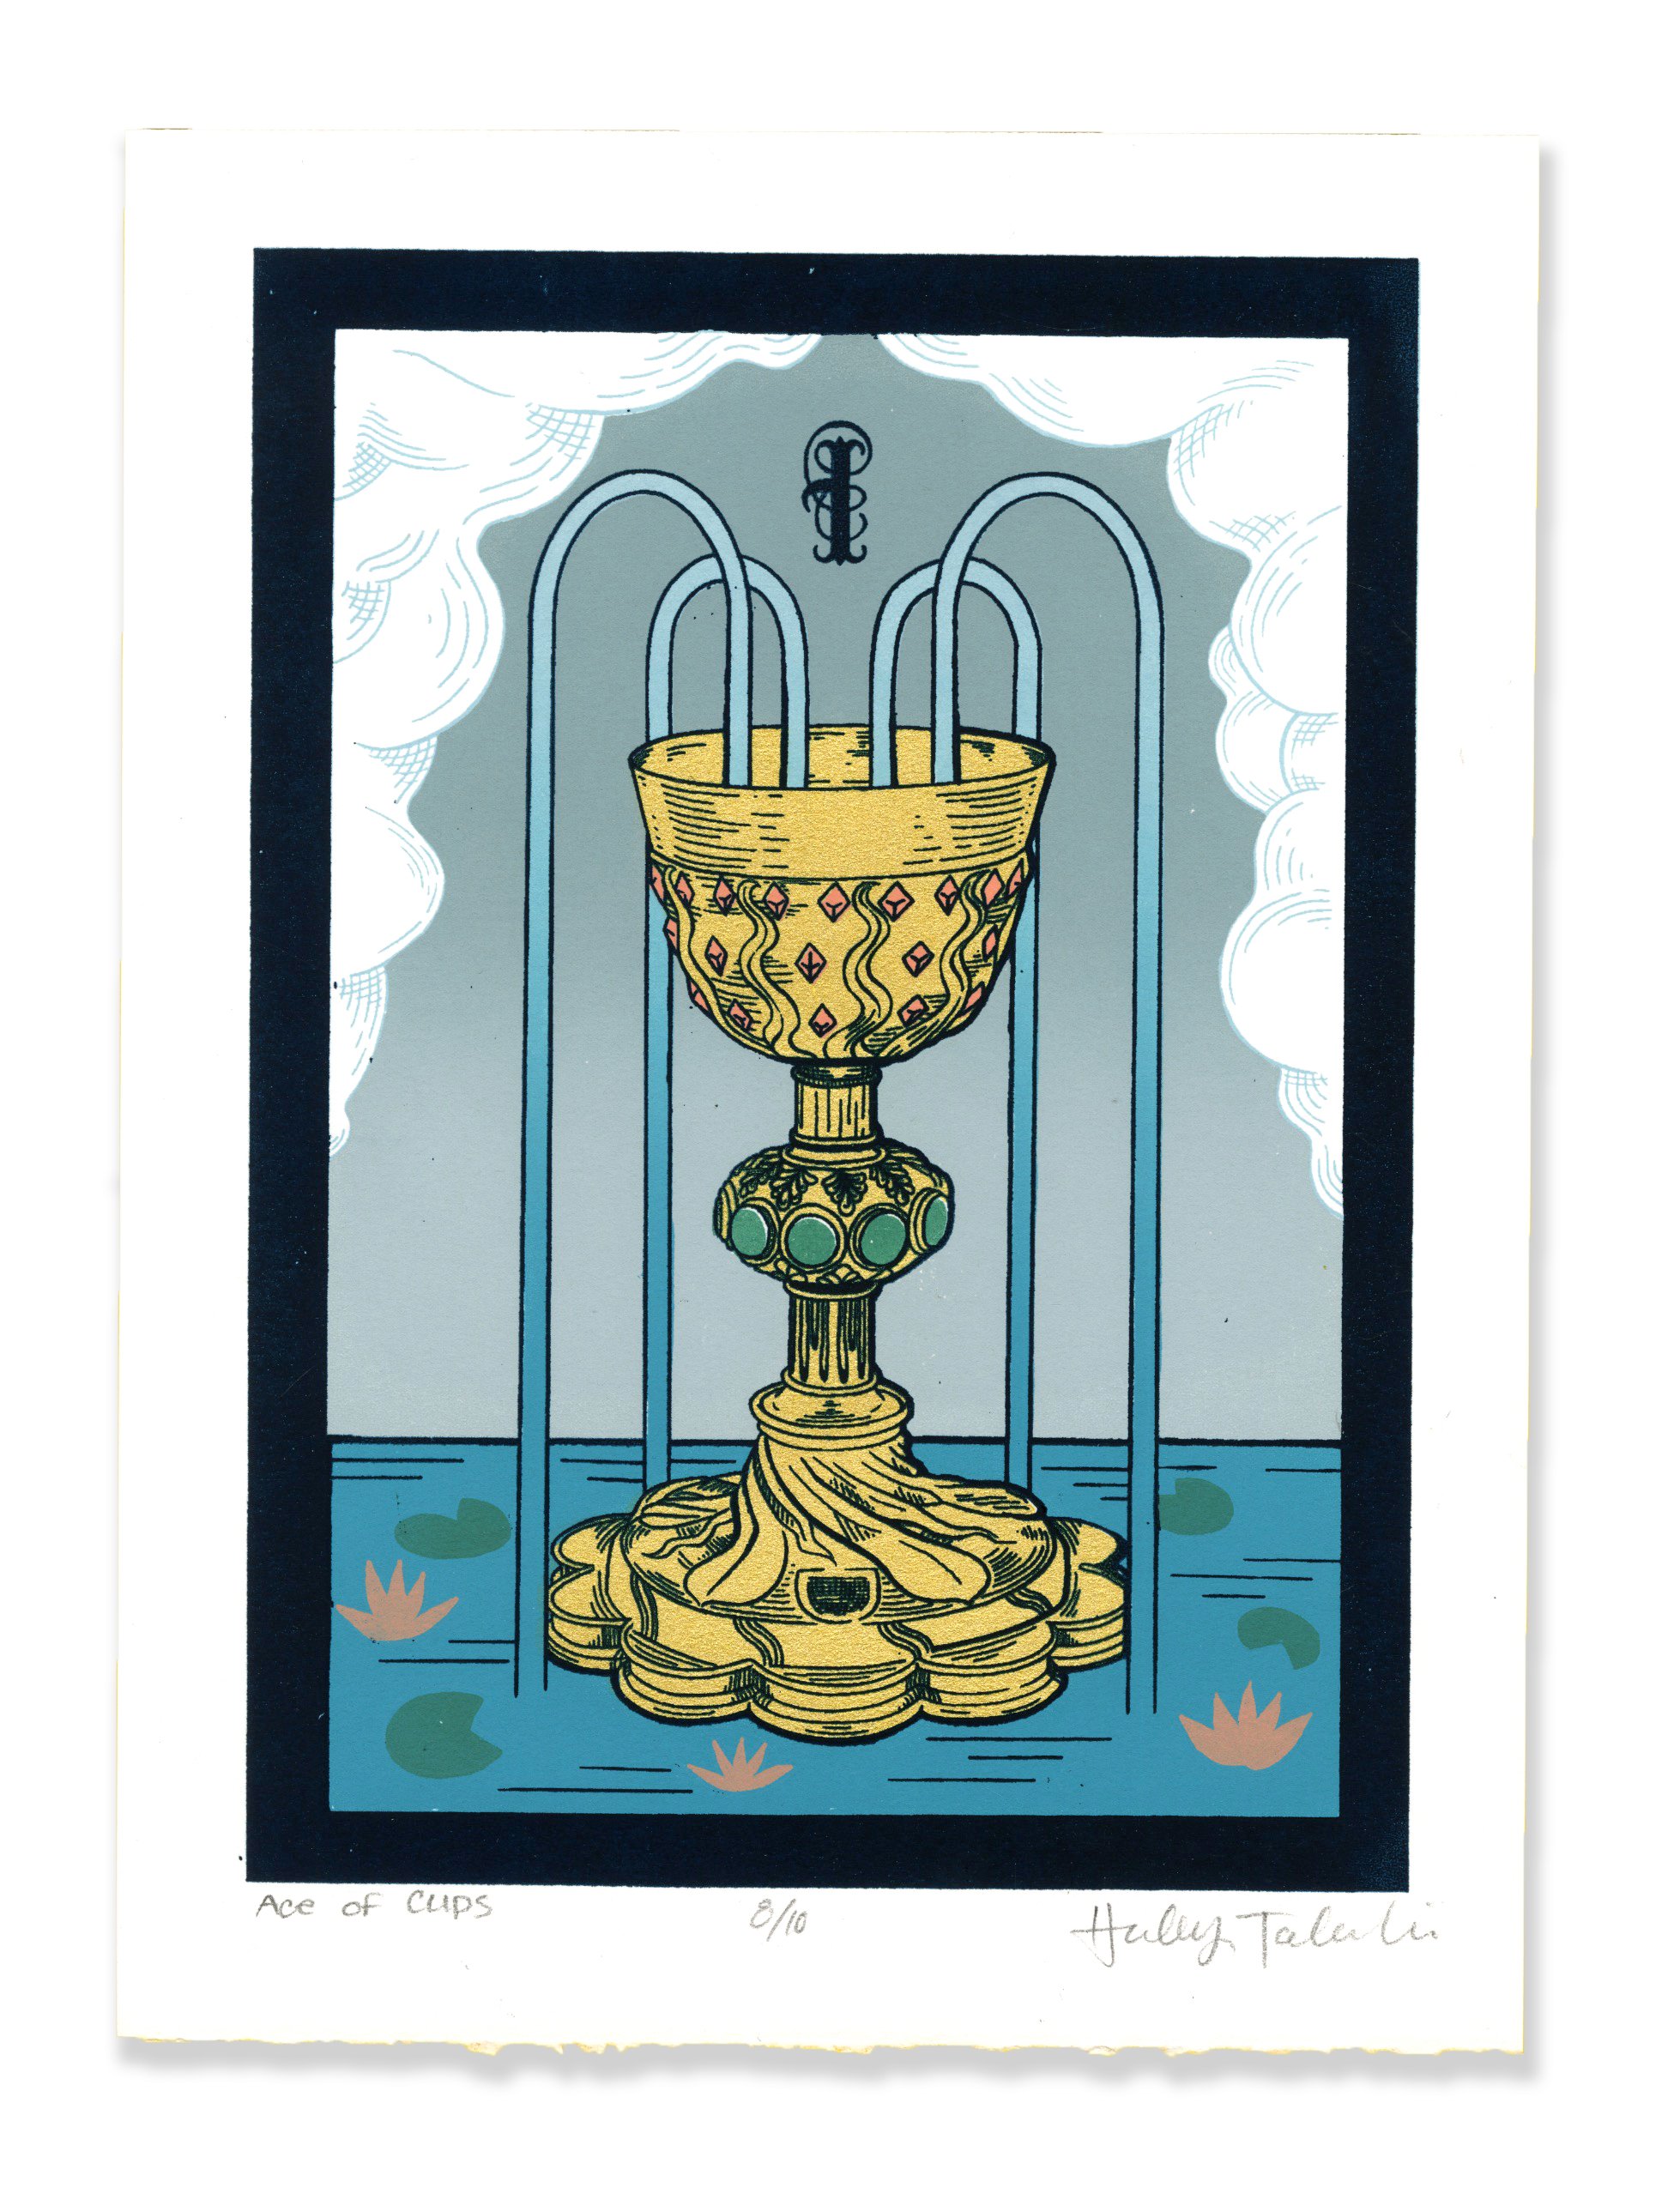 Ace of Cups 8/10